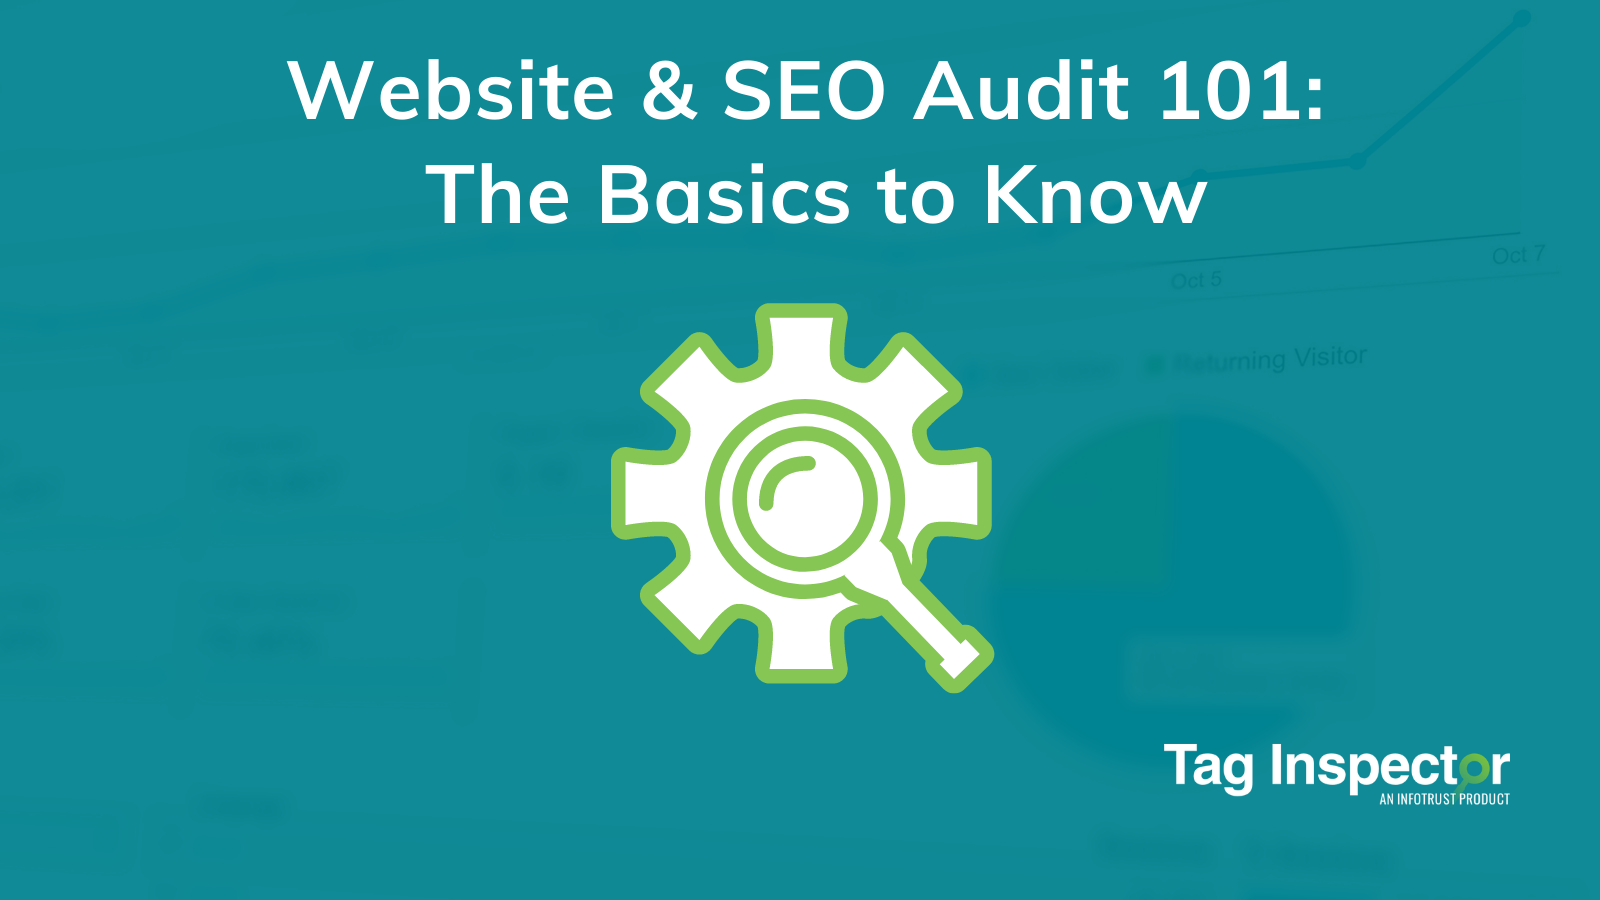 Website & SEO Audit 101: The Basics to Know